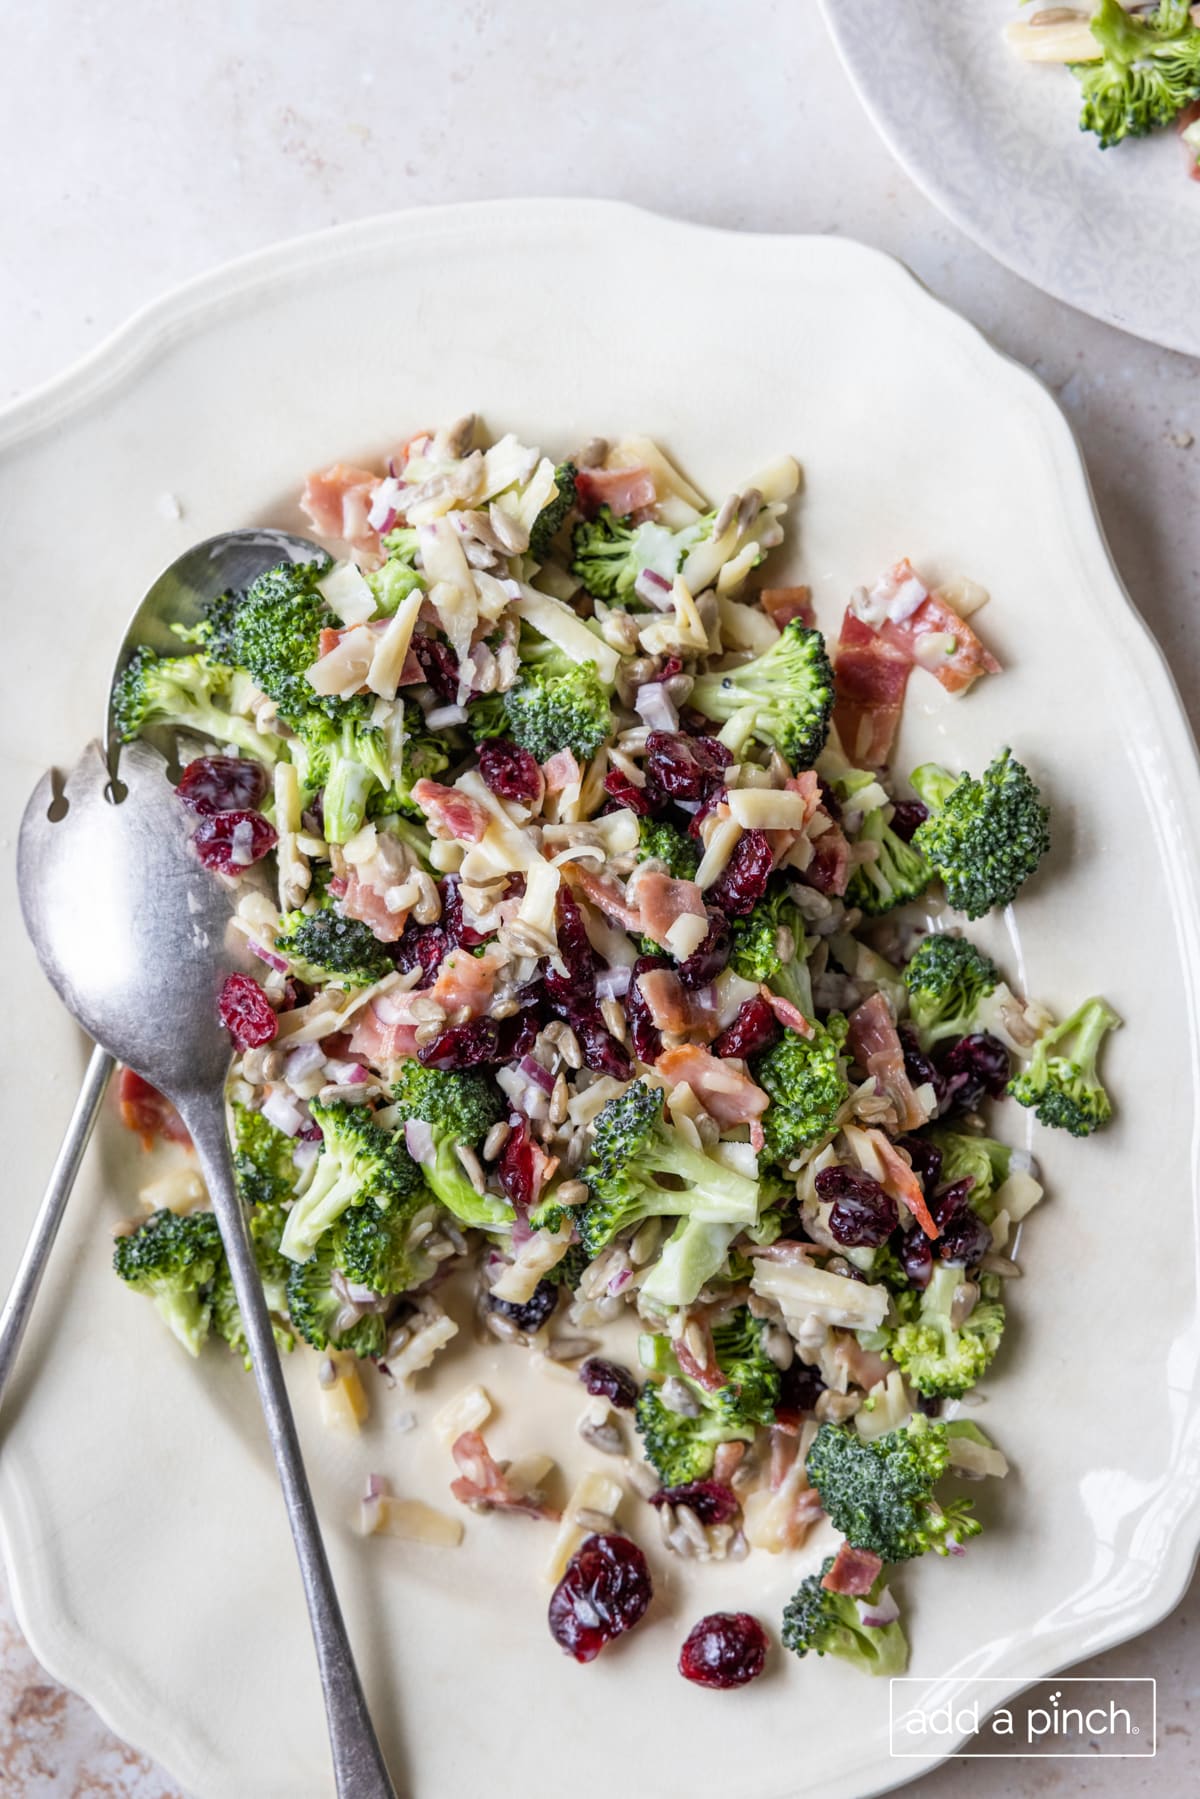 Broccoli salad on a white platter with serving utensils.